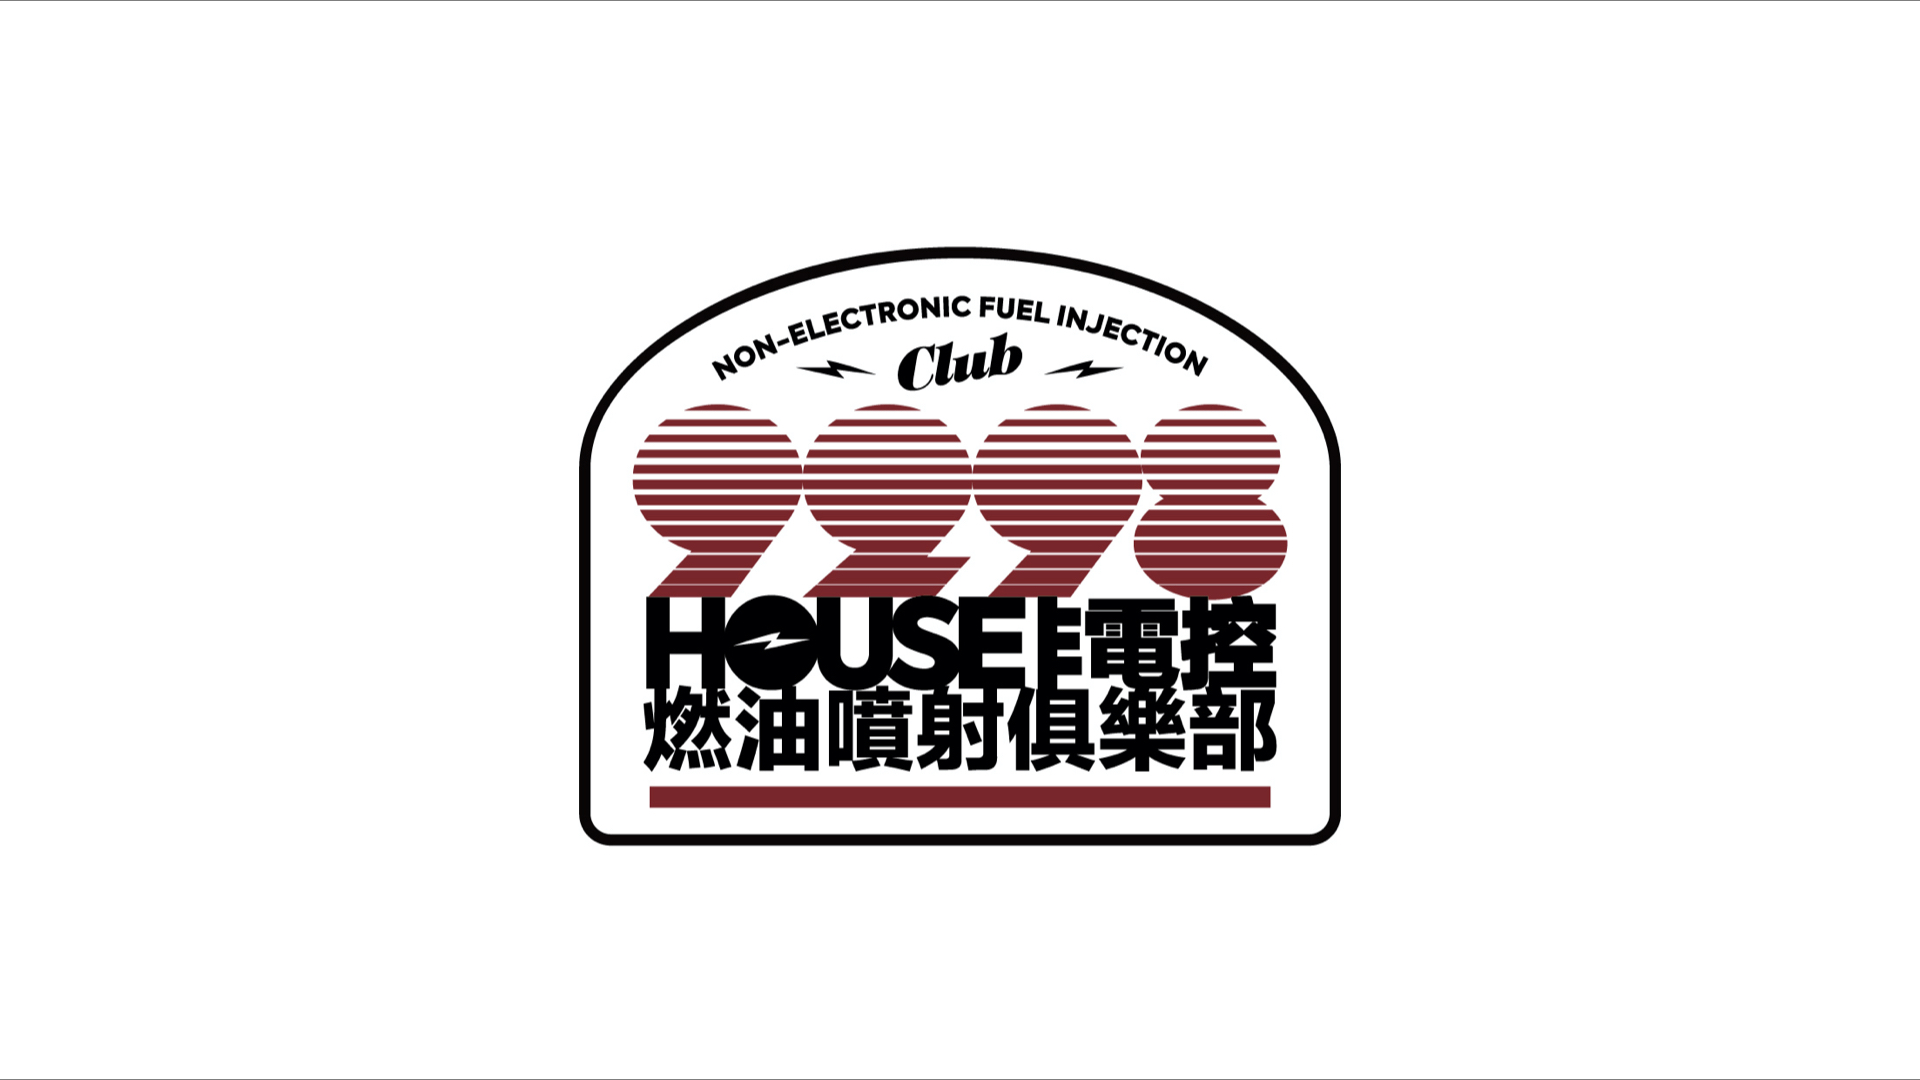 Group1 Case | Font logo Non-Electronic Fuel Injection Club